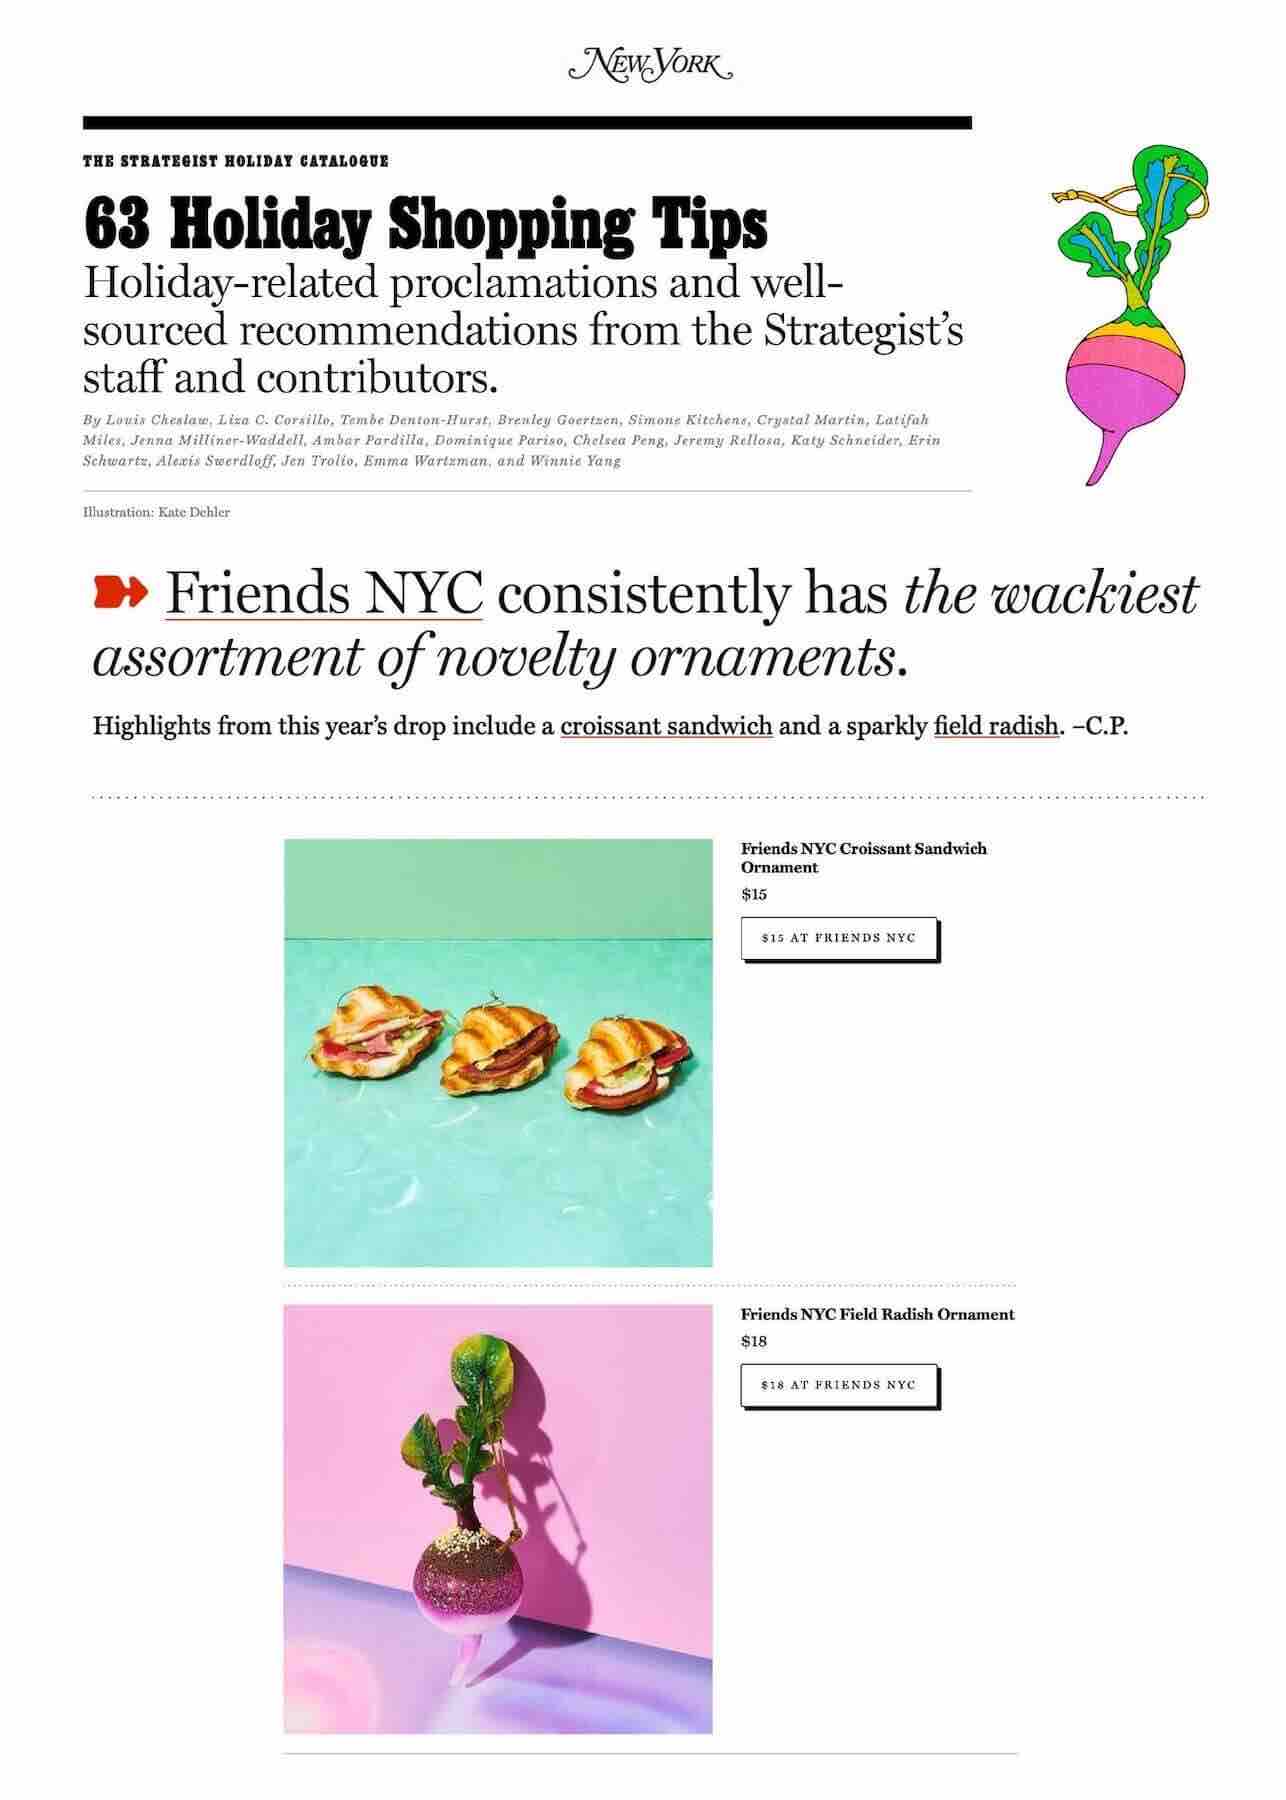 Friends NYC of Brooklyn in New York Magazine The Strategist Gift Guide - featuring wacky ornaments like pictured squishy croissant sandwiches and glass radish.